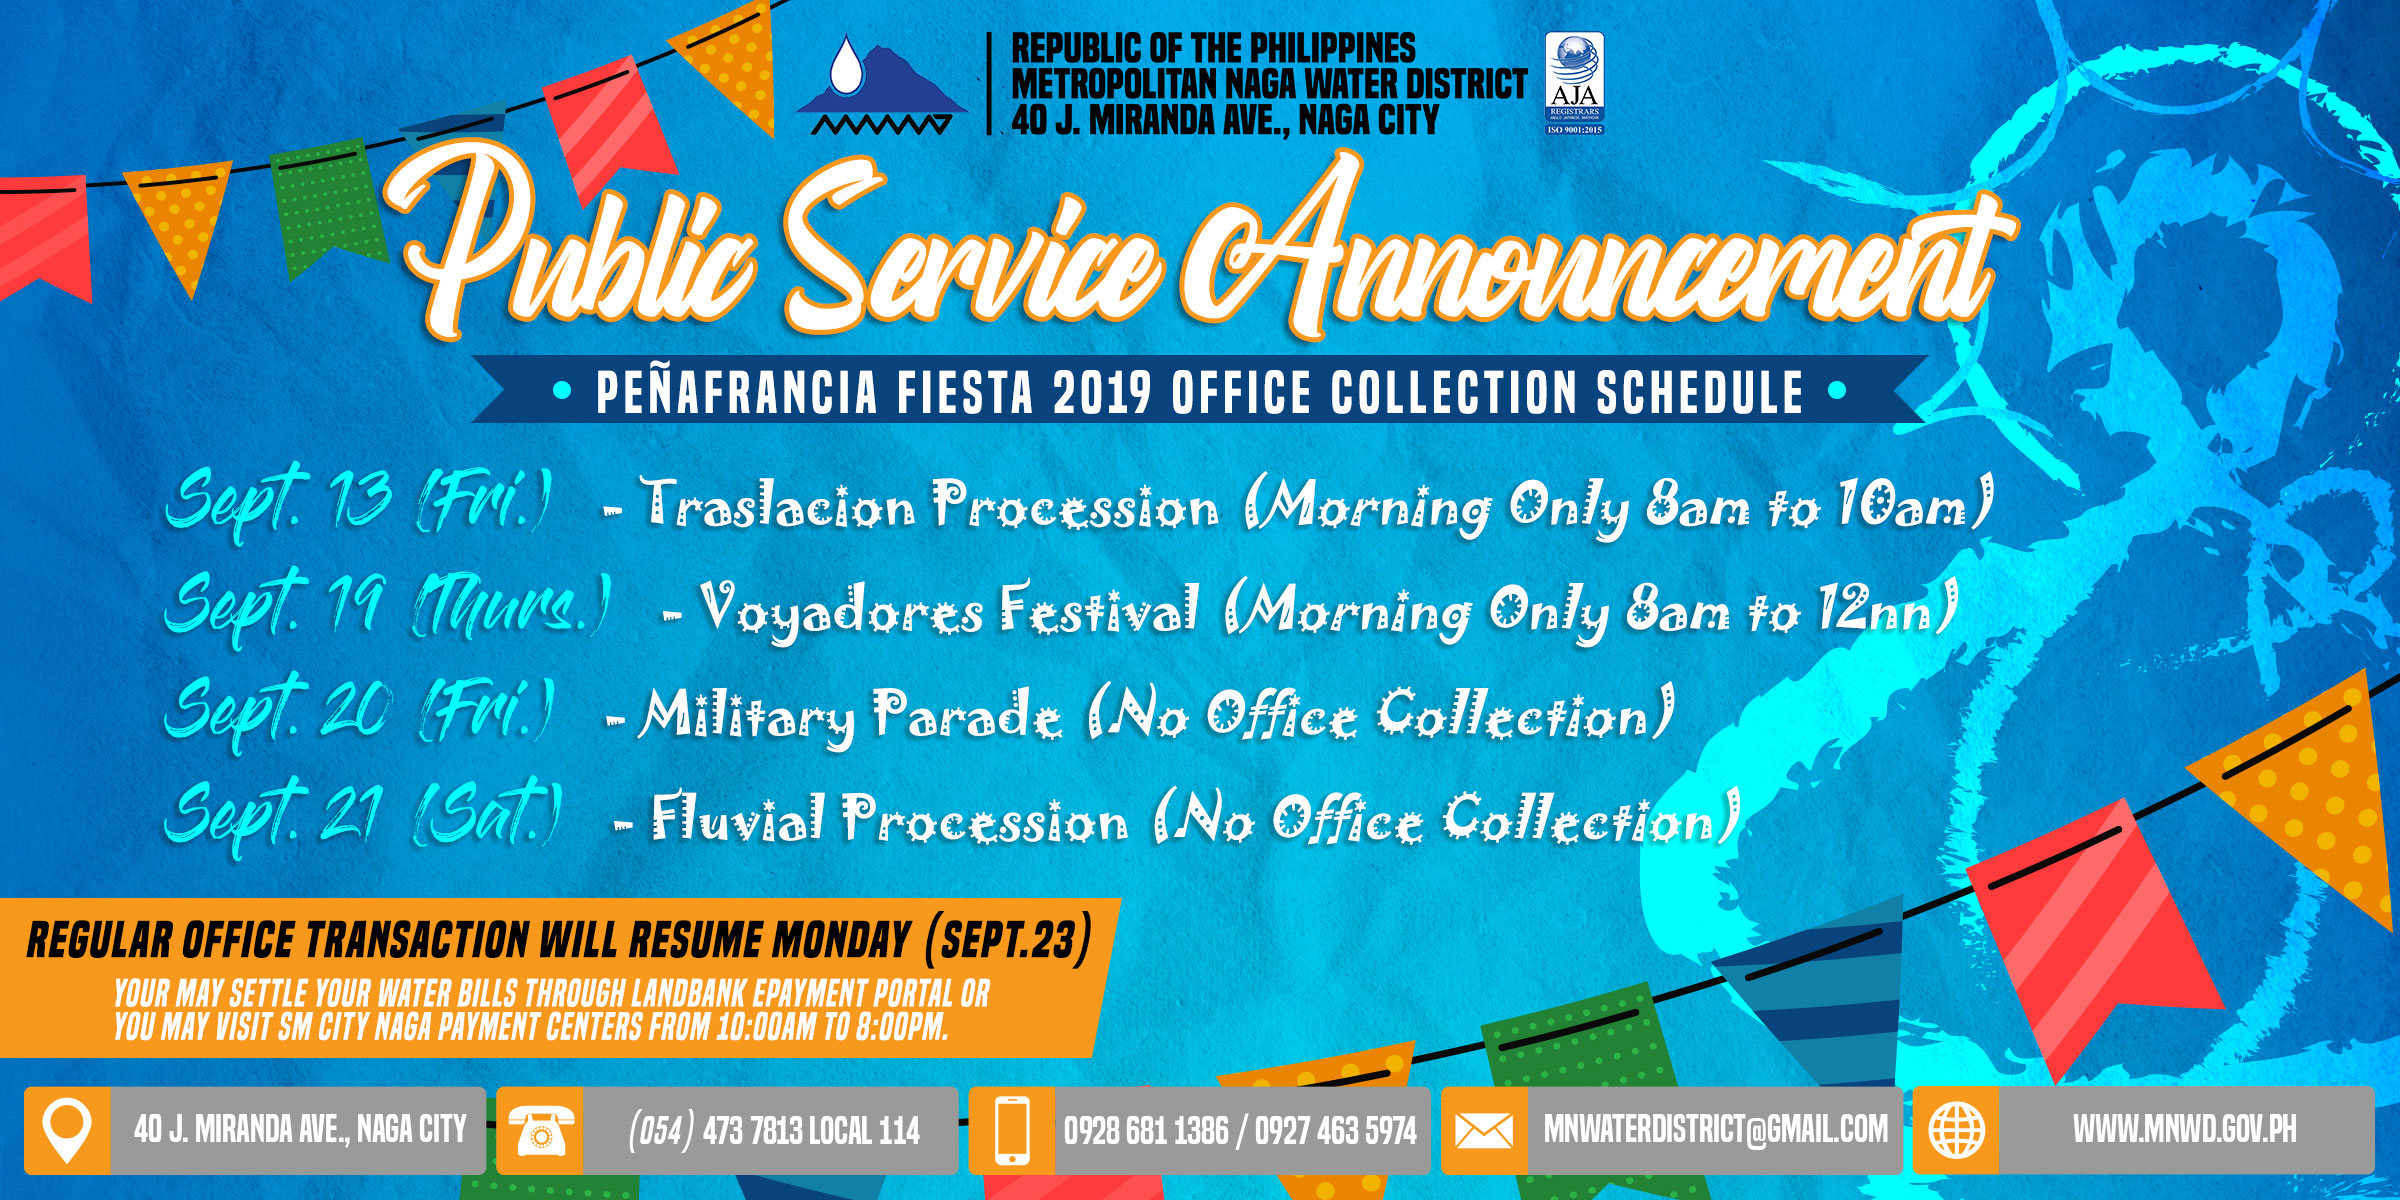 mnwd-urges-the-public-to-save-water-for-the-pe-afrancia-fiesta